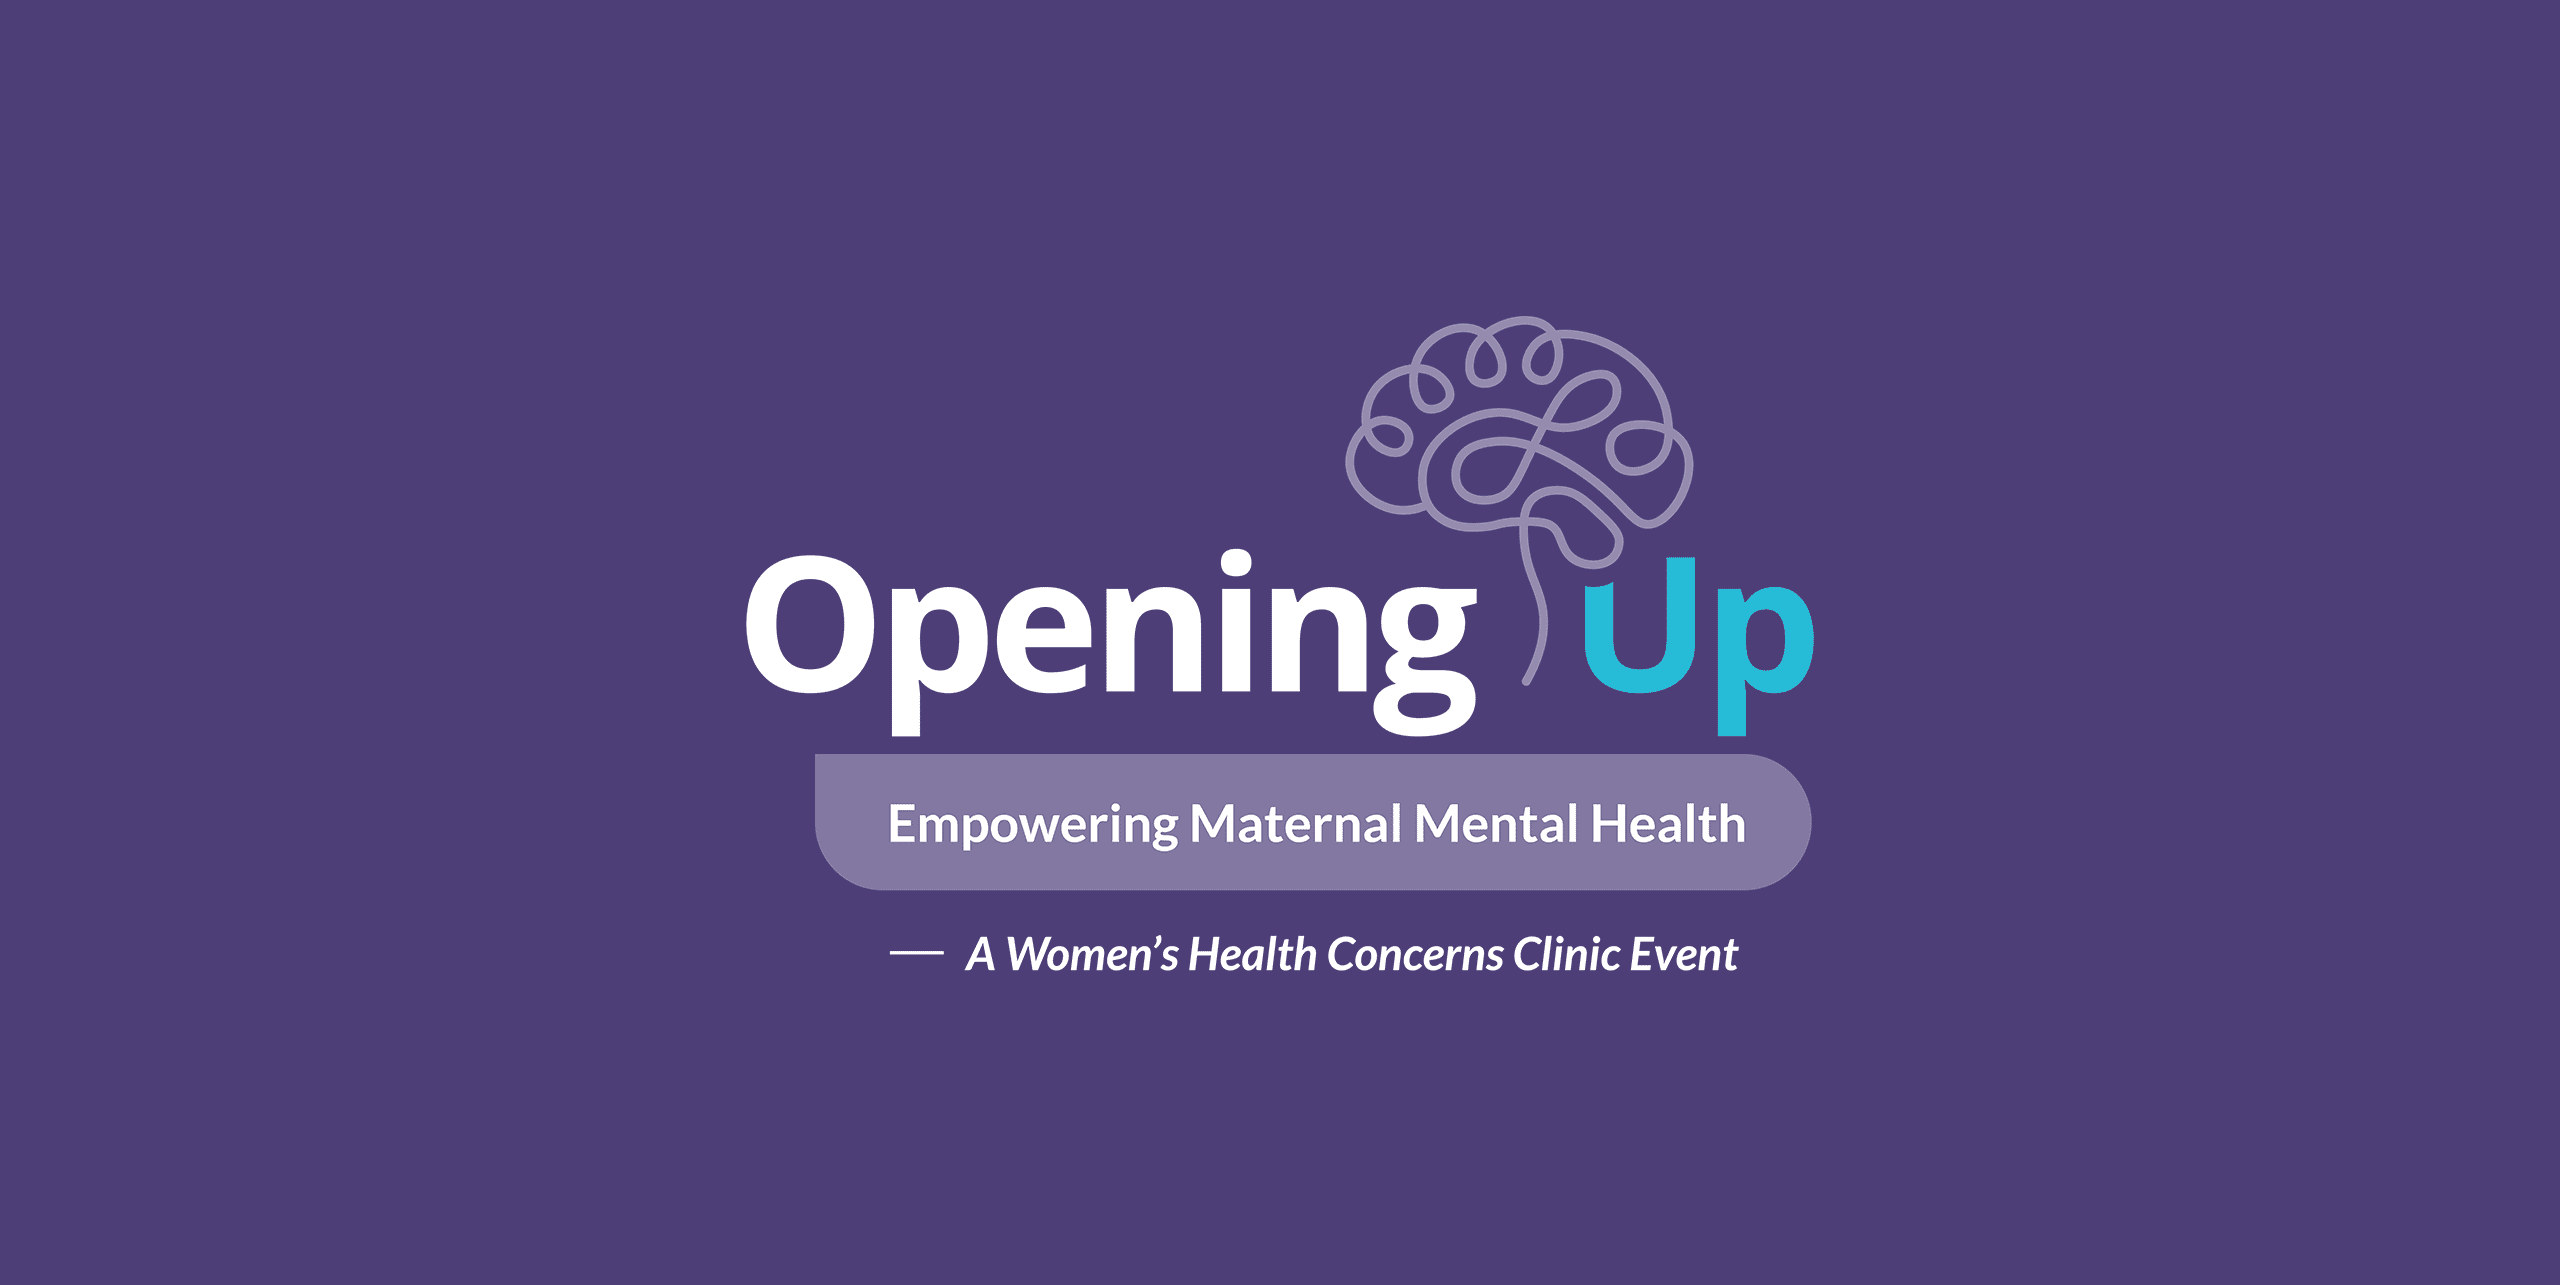 The logo for Opening Up featured on a purple background. The logo features an illustrative brain graphic and the subheading Empowering Maternal Mental Health